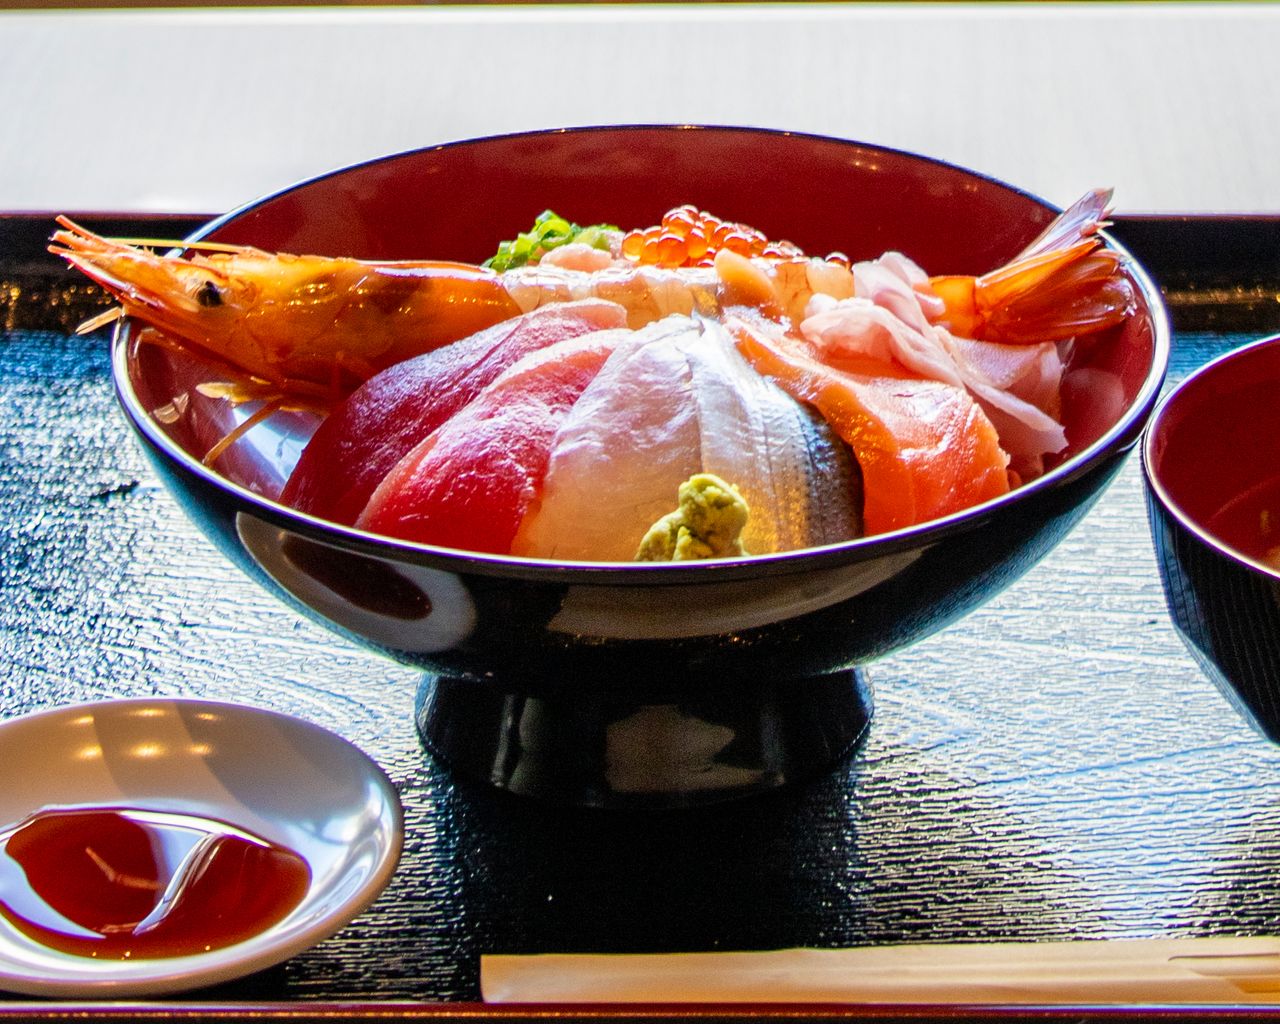 Tsukiji Kaisen Itadori’s kaisendon features seven different kinds of seafood over a bowl of rice. The restaurant also offers standard nigirizushi and hitsumabushi (grilled eel on a bed of rice). (© Nippon.com)